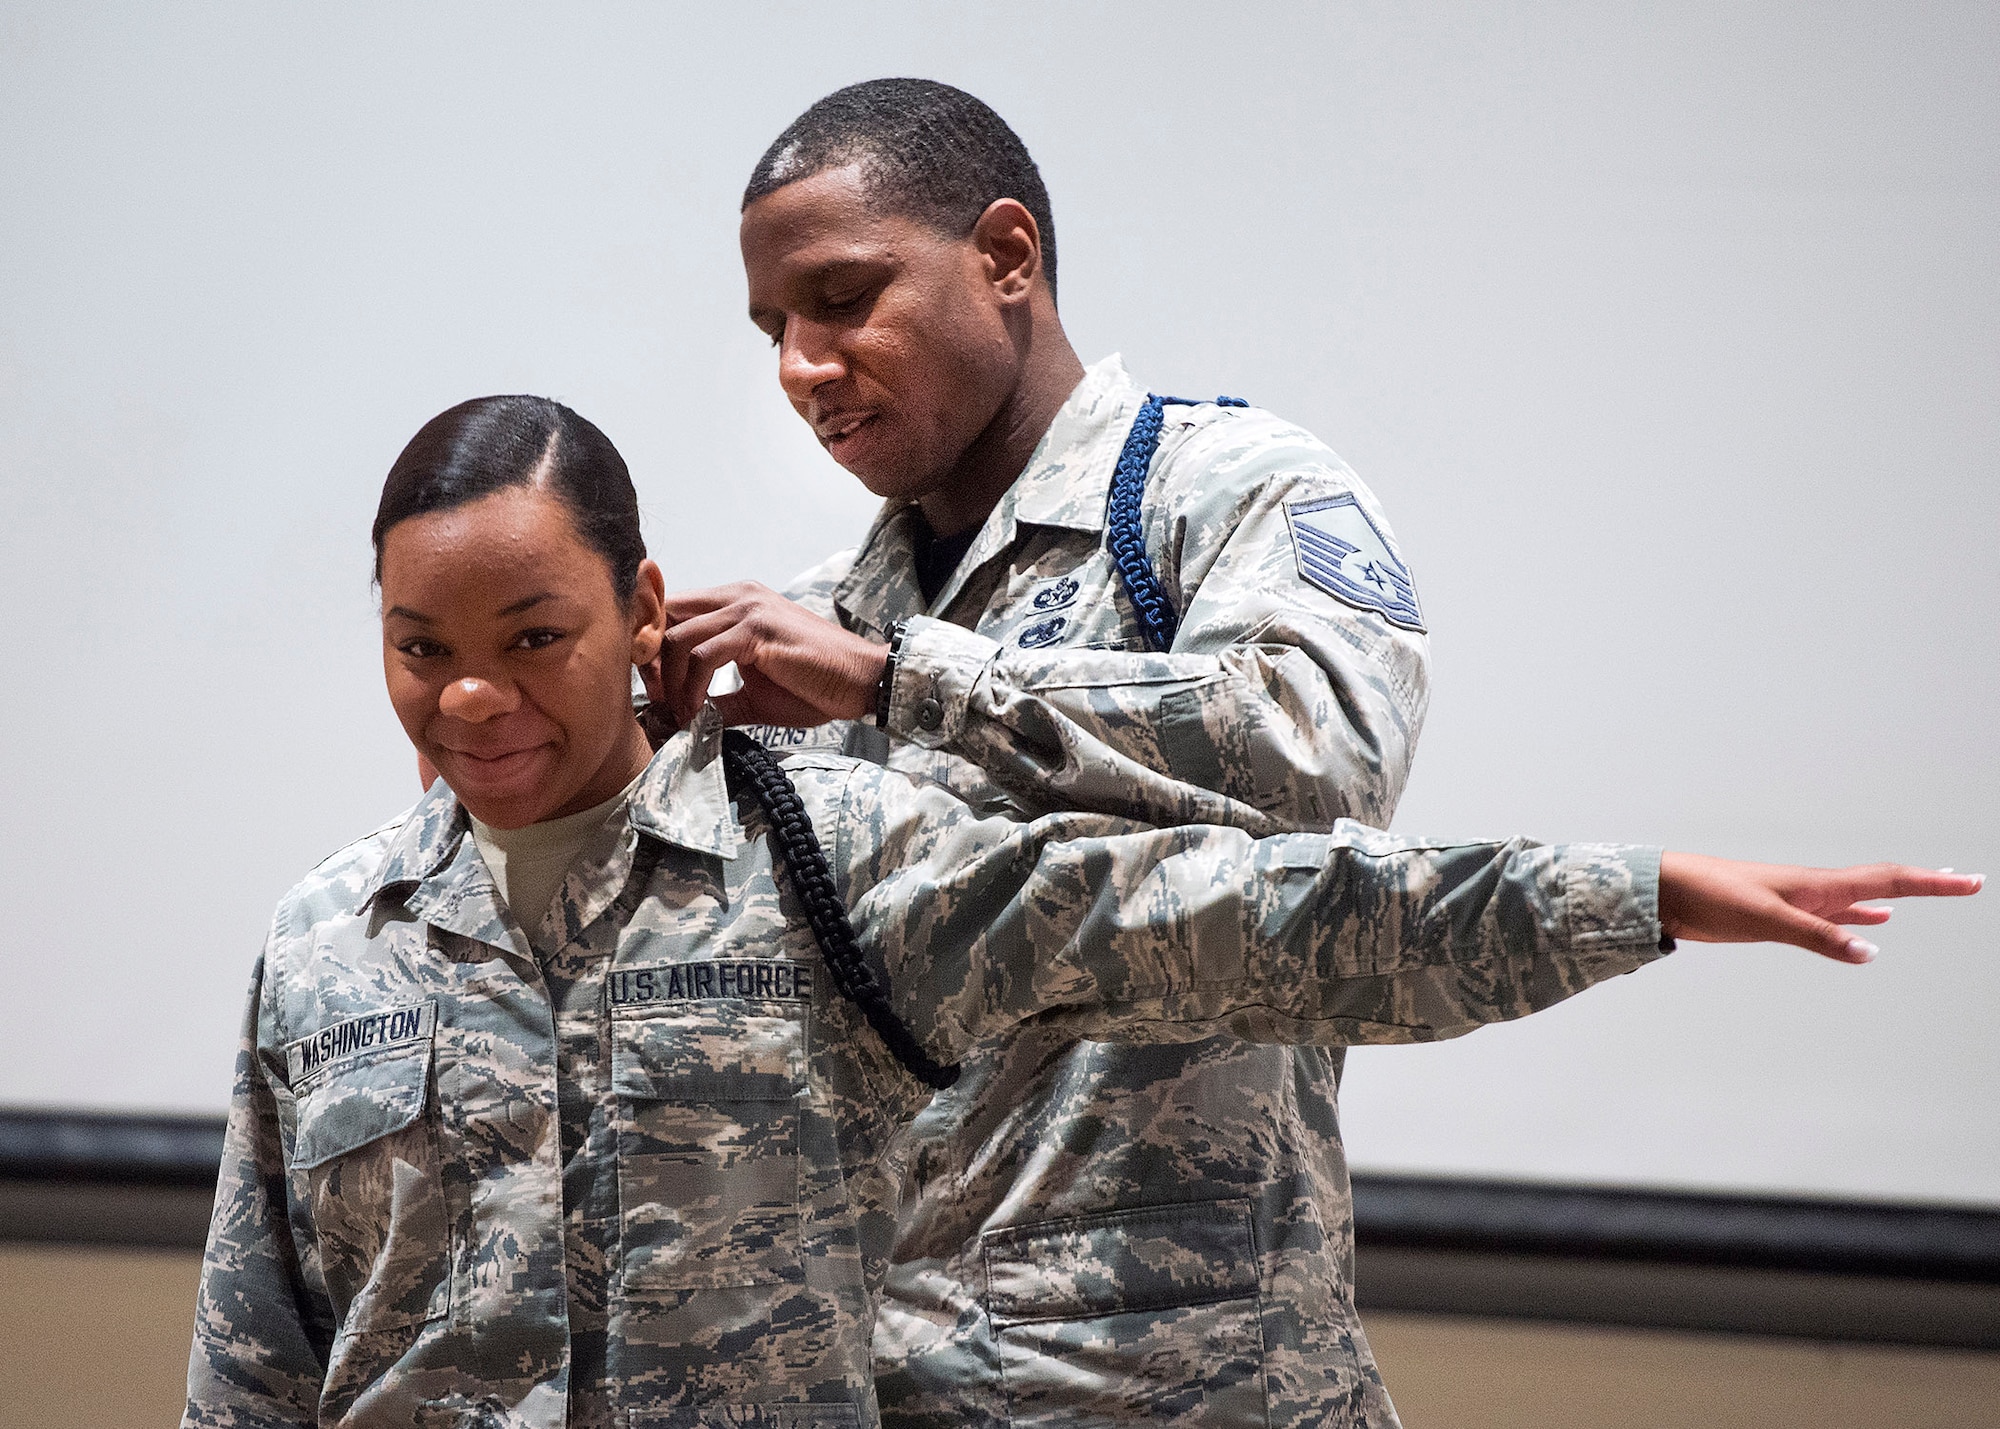 Master Sgt. Michael J. Stevens, United States Air Force School of Aerospace Medicine Military Training Flight chief, pins on Airman Chiara Washington the black rope signifying her as a member of the school’s drill team July 7, 2017 on Wright-Patterson Air Force Base, Ohio. Stevens, was named as one of the Air Force’s 12 Outstanding Airmen of the Year. (U.S. Air Force photo by R.J. Oriez)